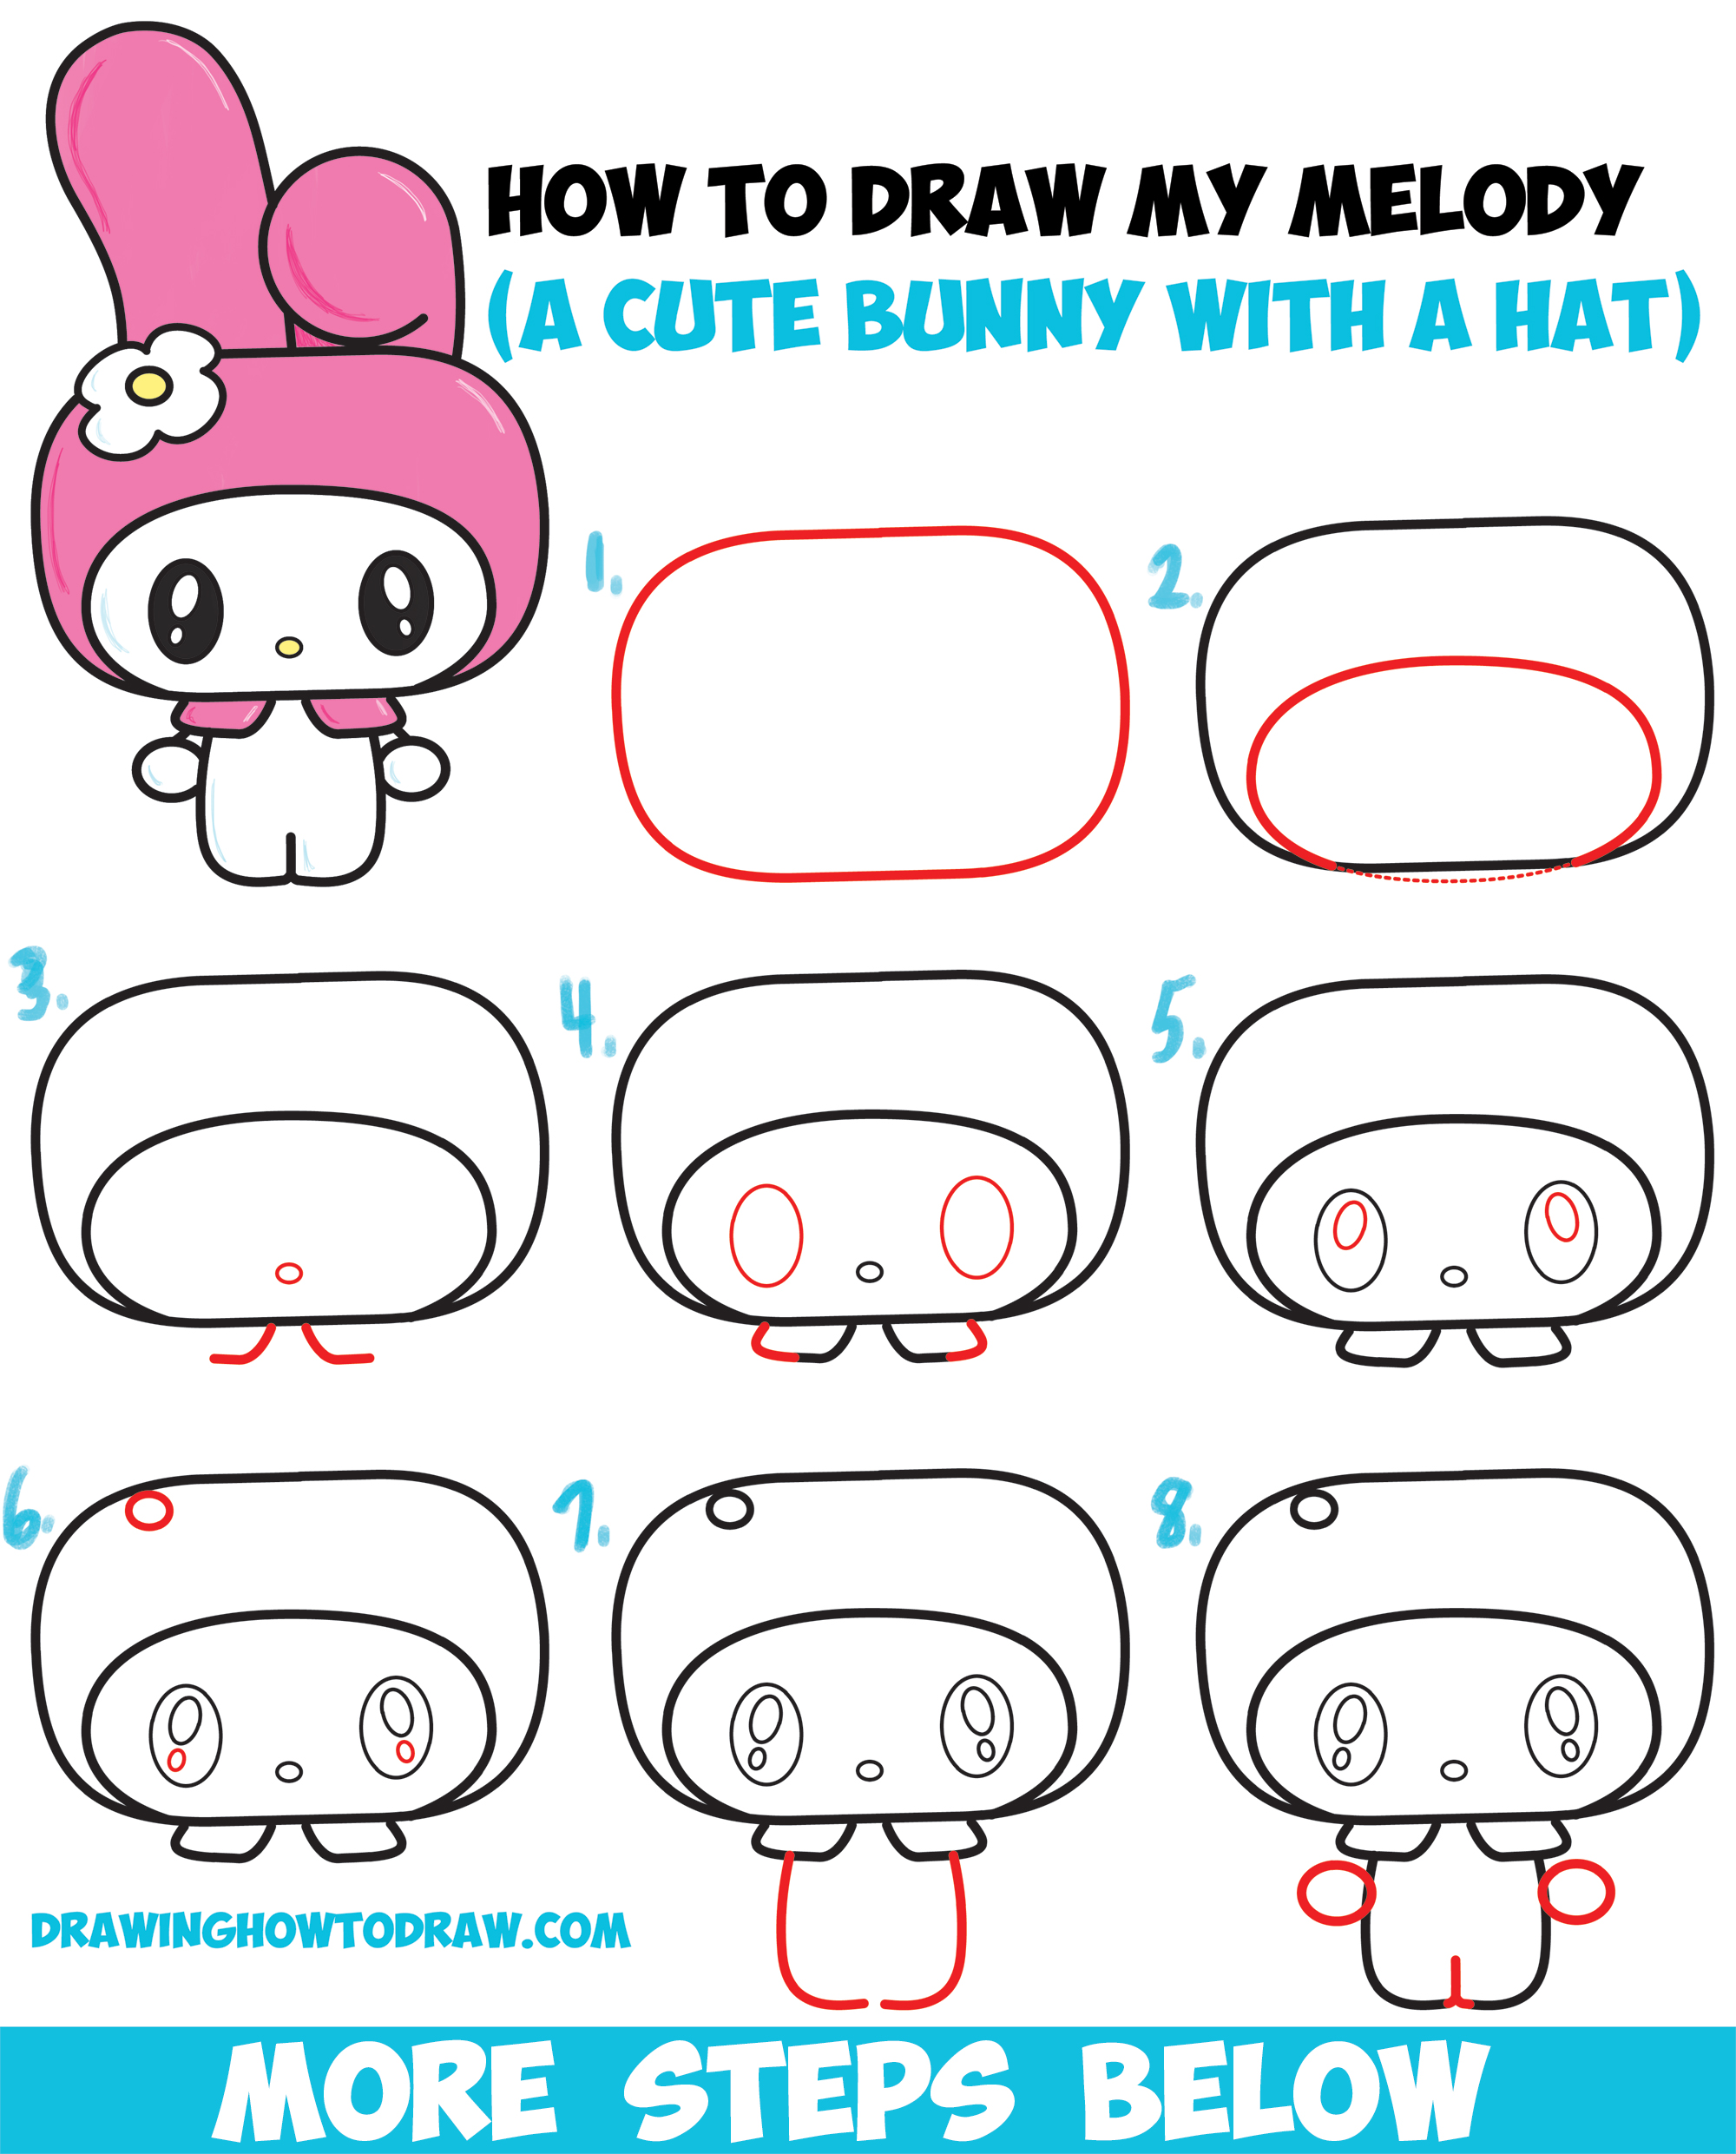 How to Draw a Cute Manga / Anime / Chibi Girl with her Kitty Cat - Easy  Step by Step Drawing Lesson - How to Draw Step by Step Drawing Tutorials